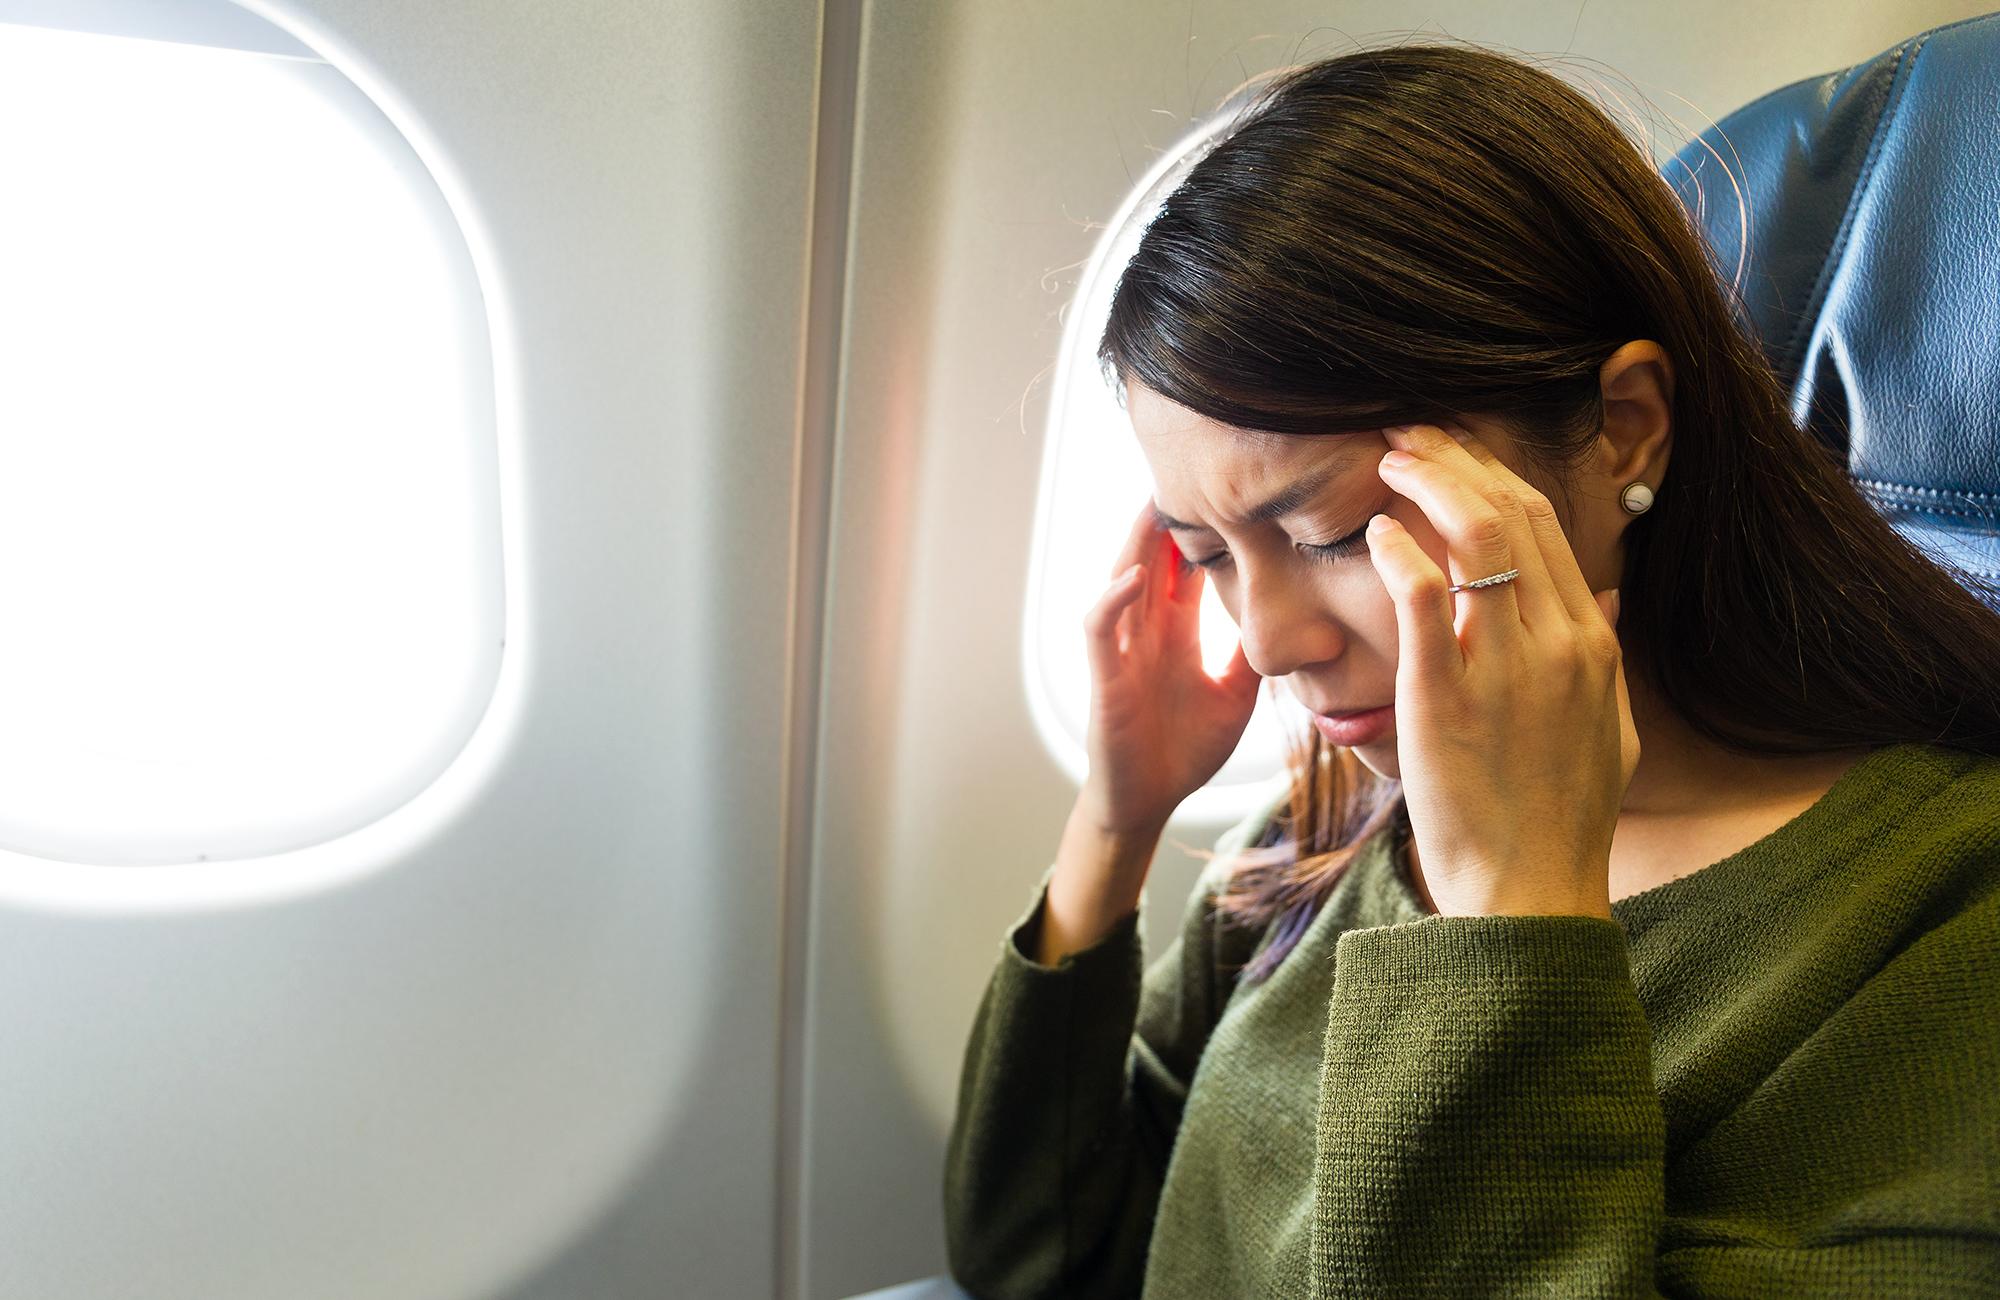 How to Cure Motion Sickness While Traveling